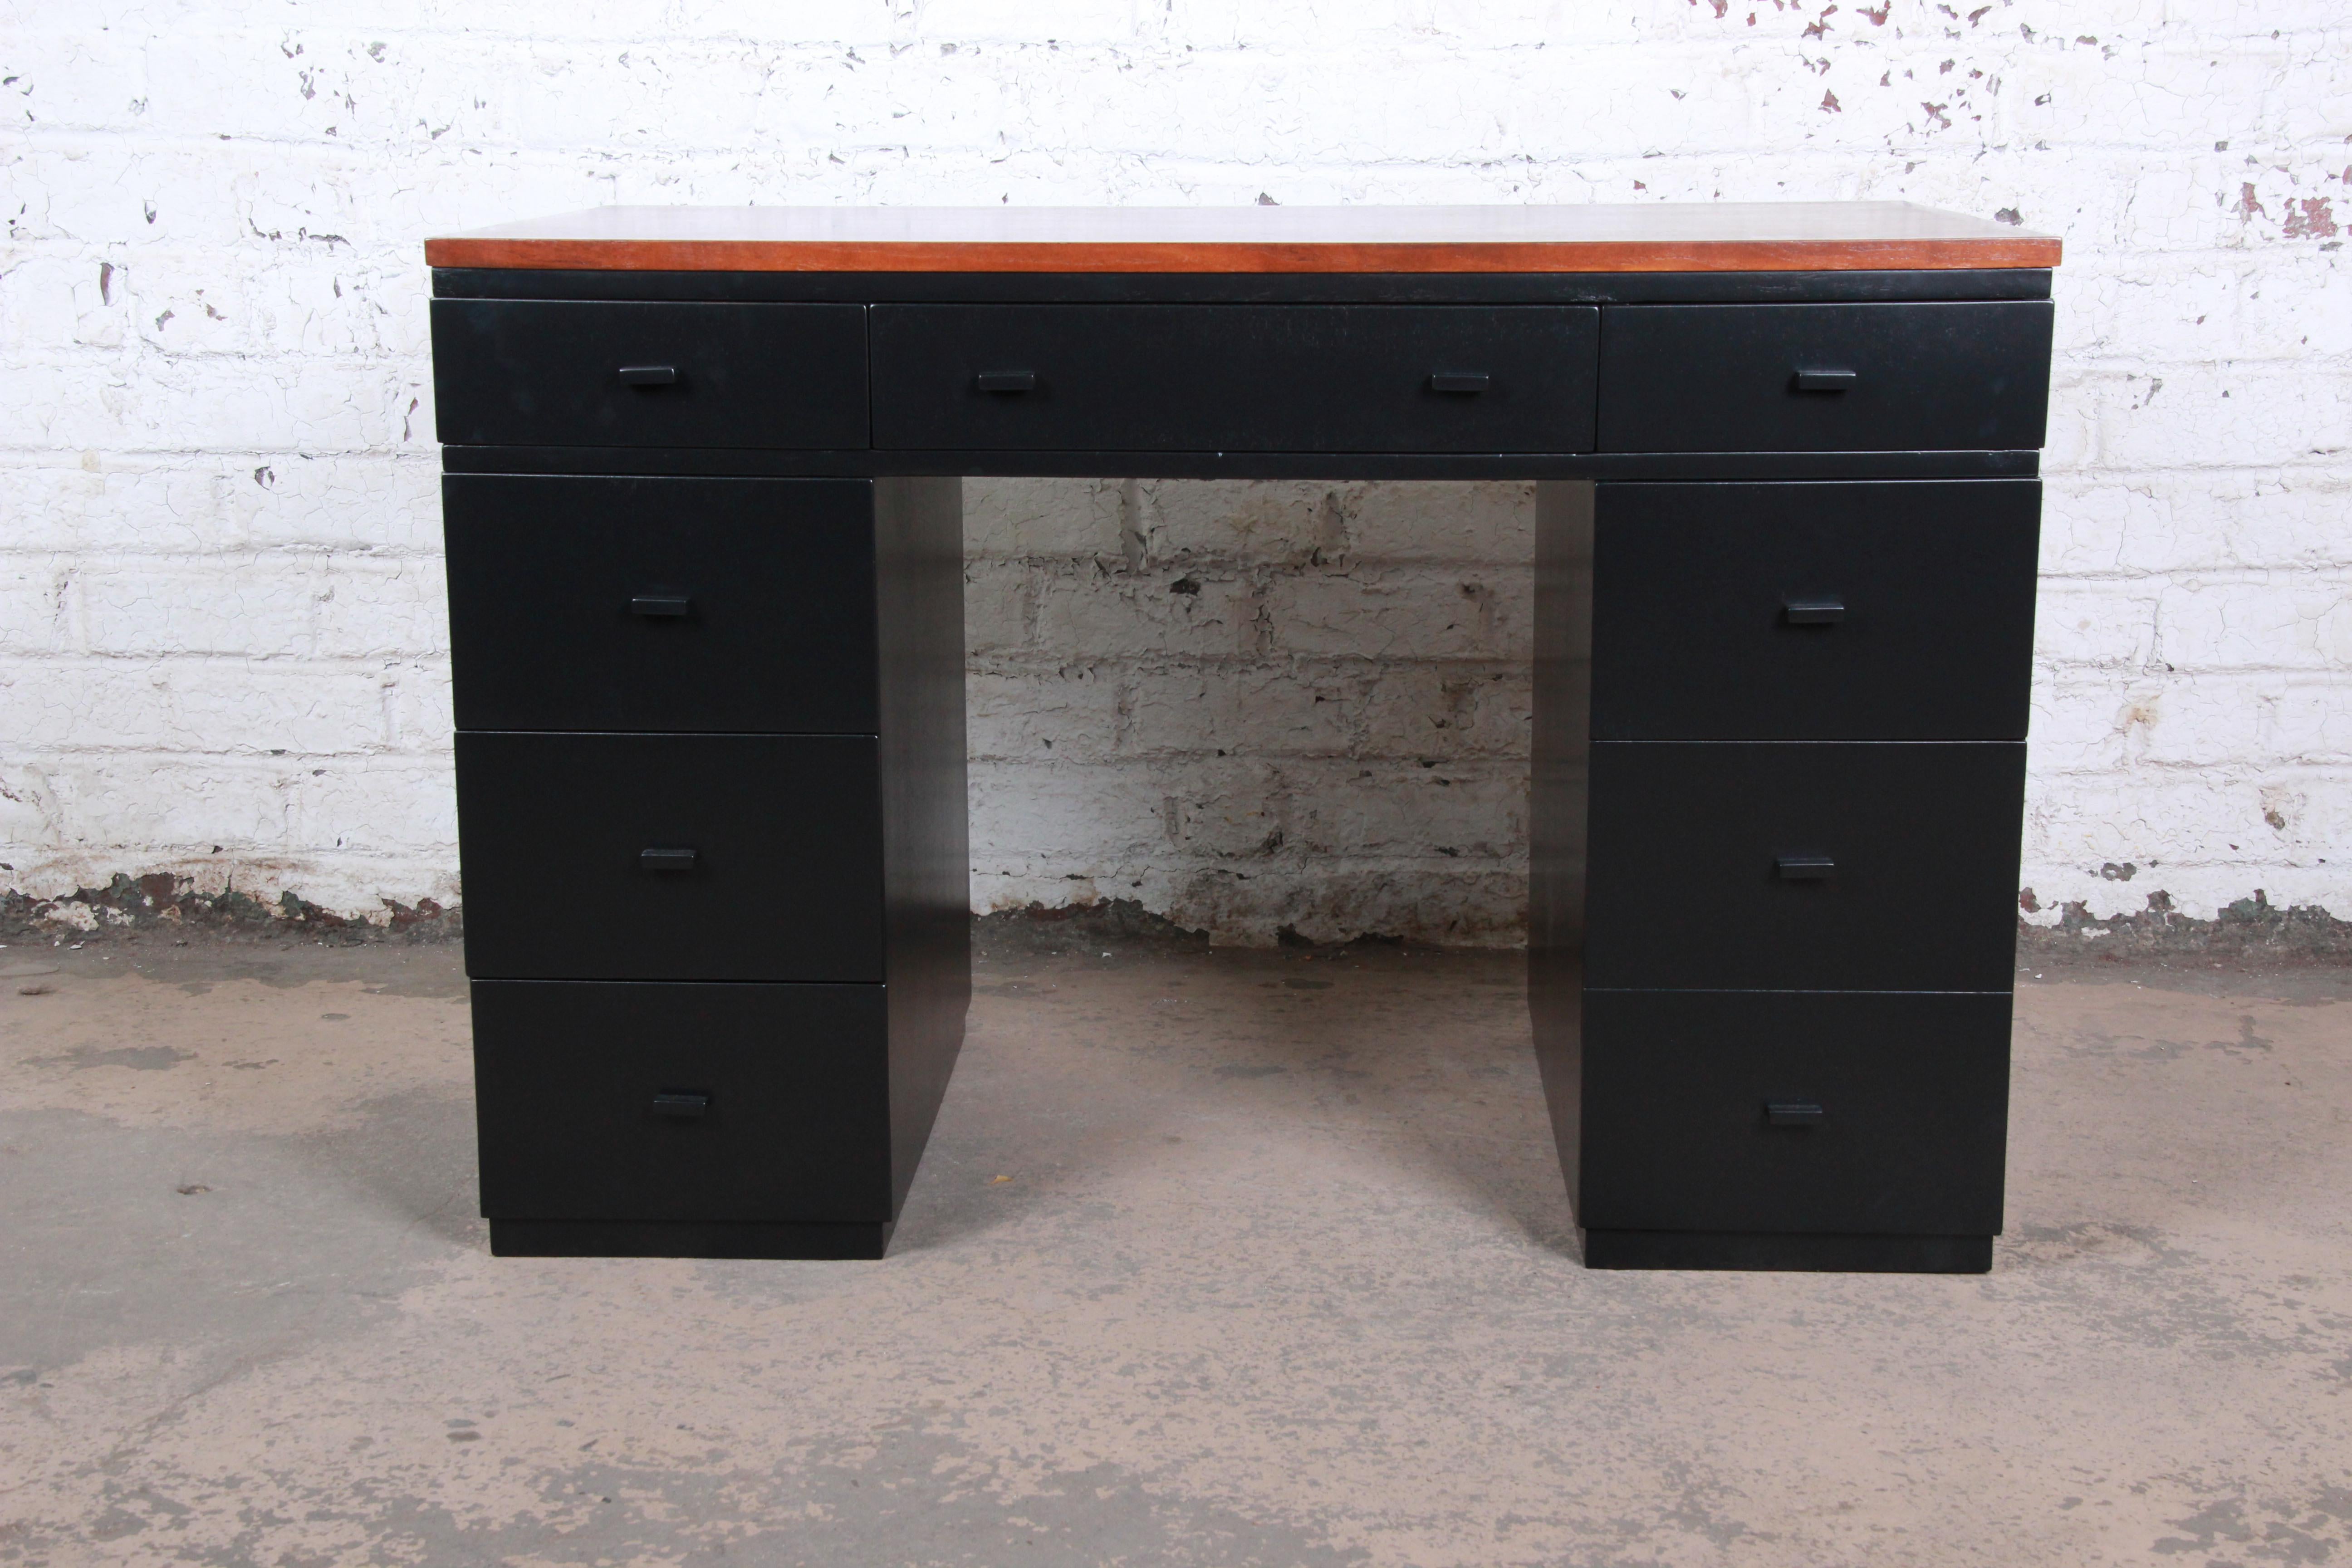 An exceptional newly restored kneehole desk by Edward Wormley for Dunbar Furniture. This is a rare surviving piece of Wormley's early Dunbar designs, circa 1941. The desk features a sleek black lacquered finish, with a stunning walnut top. It offers